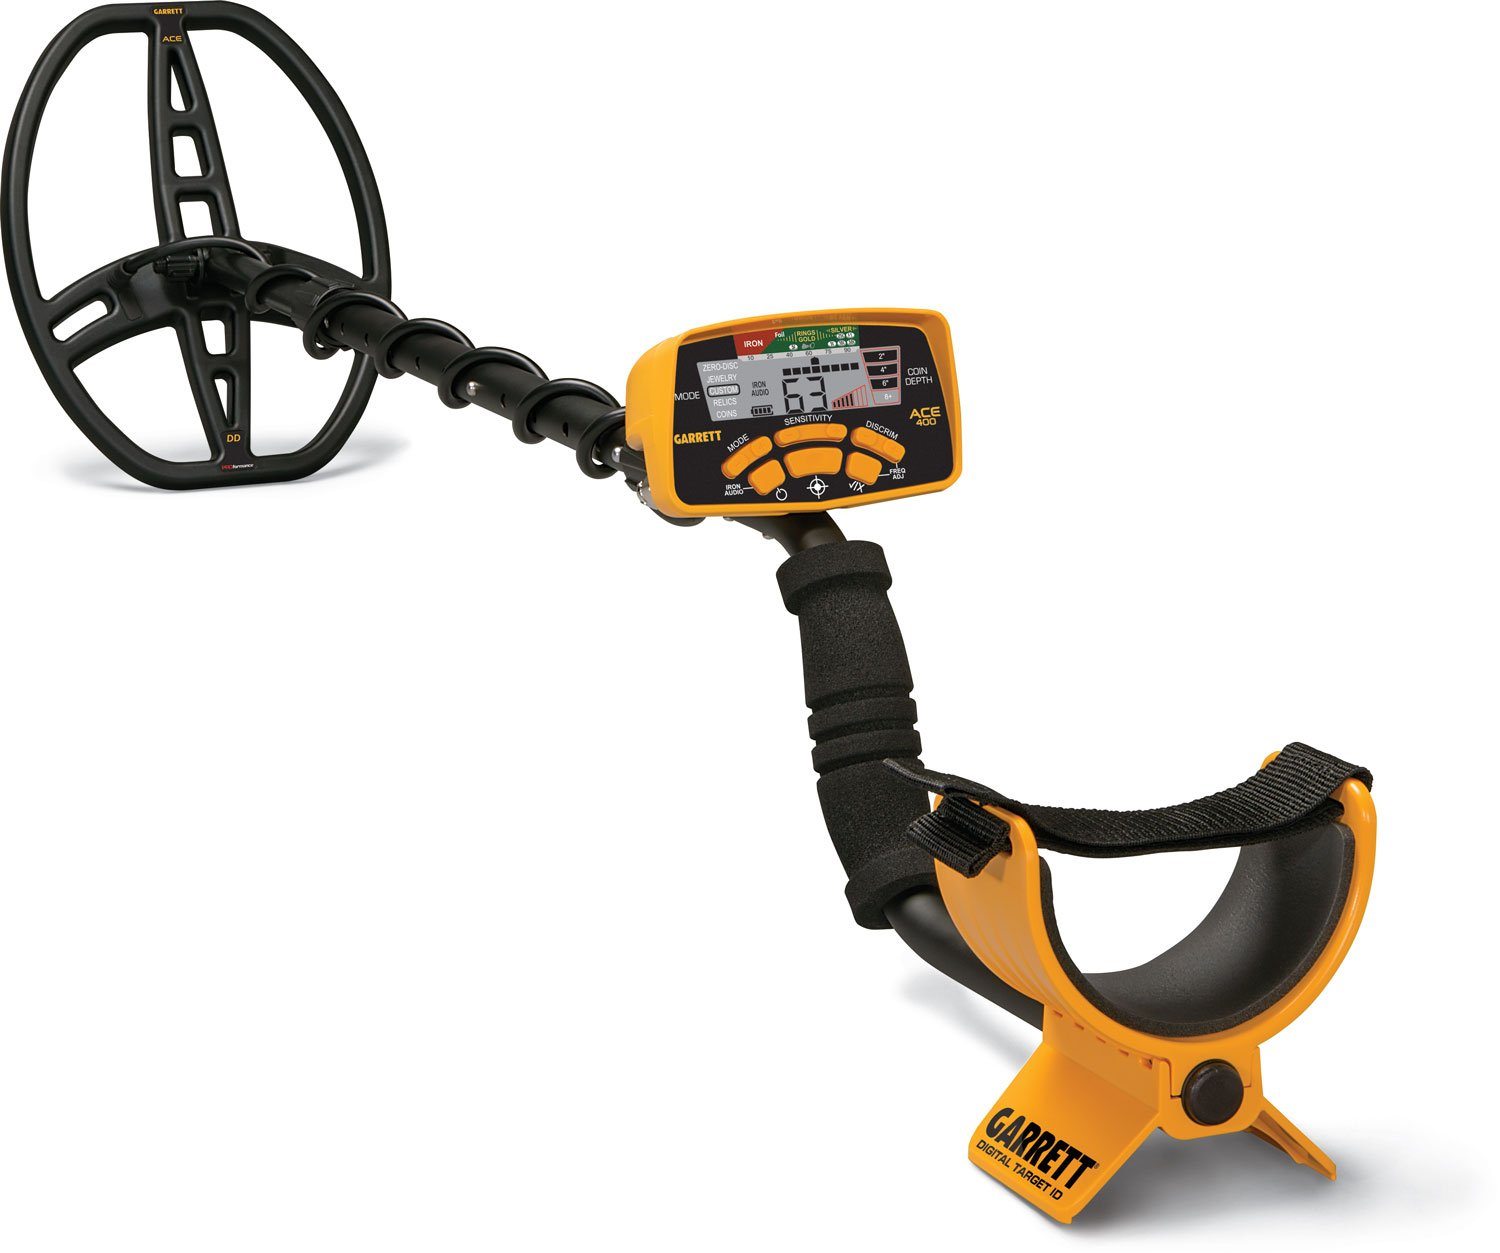 Garrett ACE 400 Metal Detector Bundle with DD Waterproof Search Coil with Carry Bag